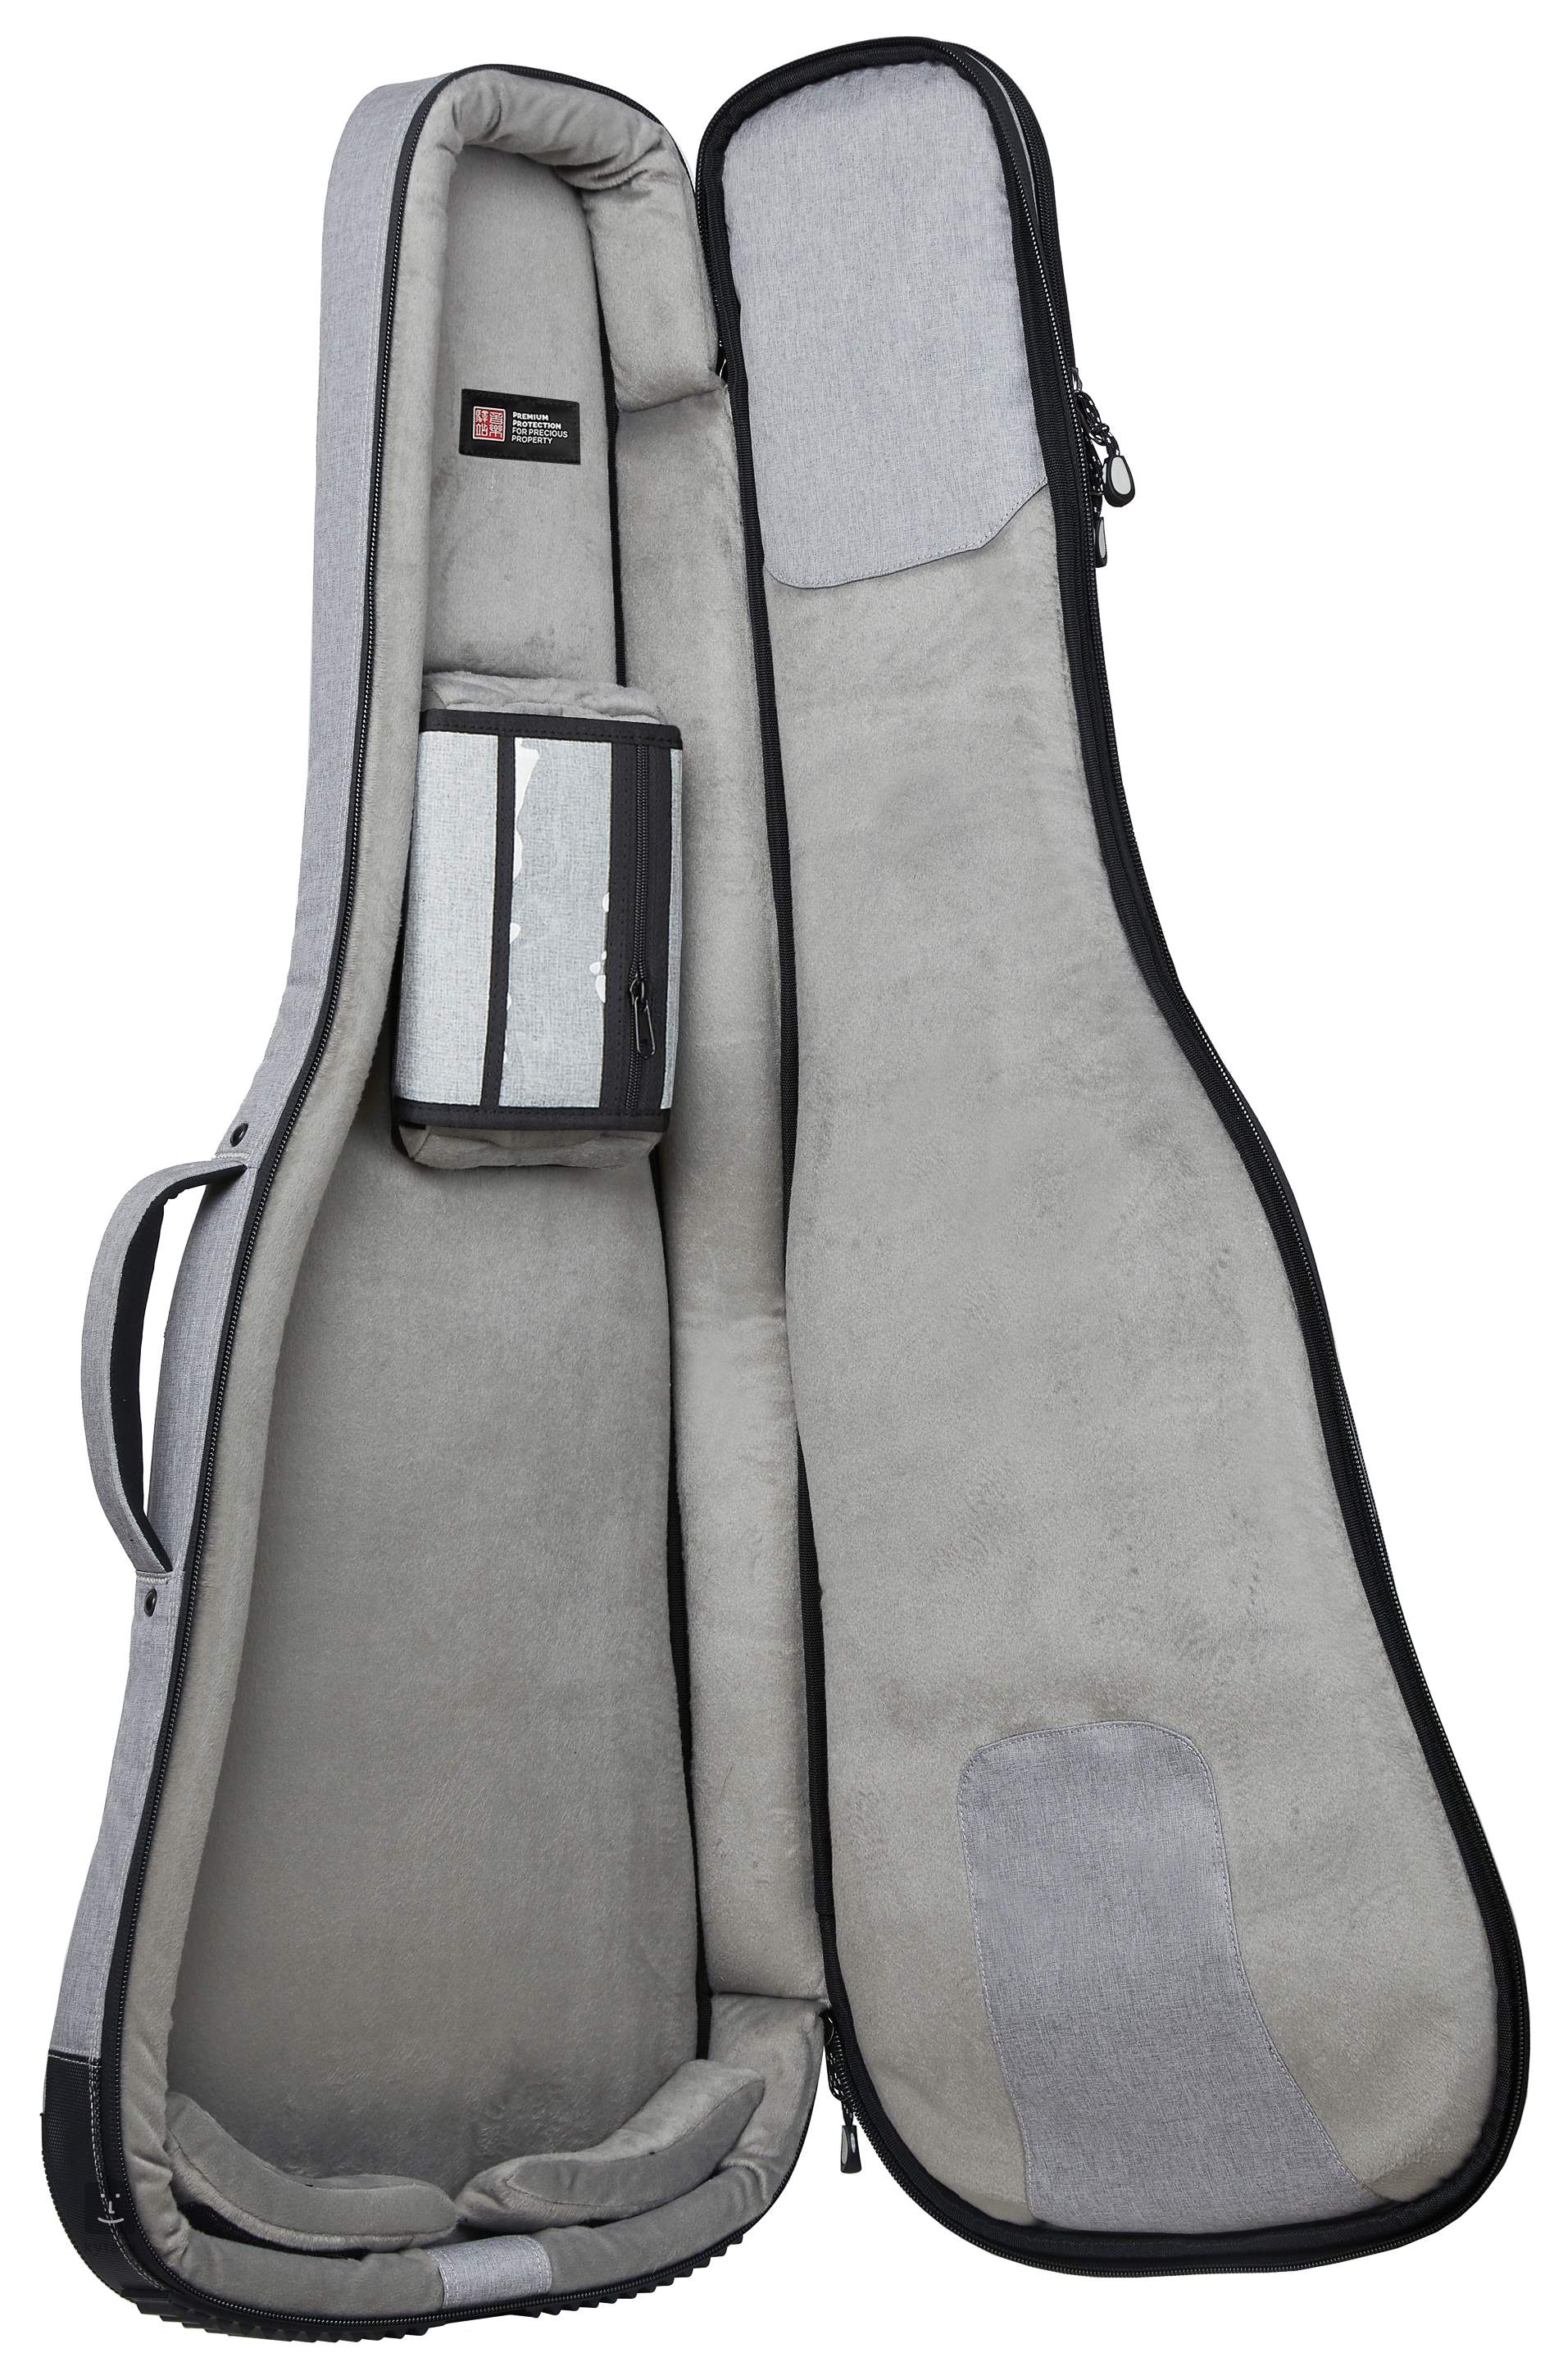 MUSIC AREA TANG30 Electric Guitar Case Gray Housse pour guitare